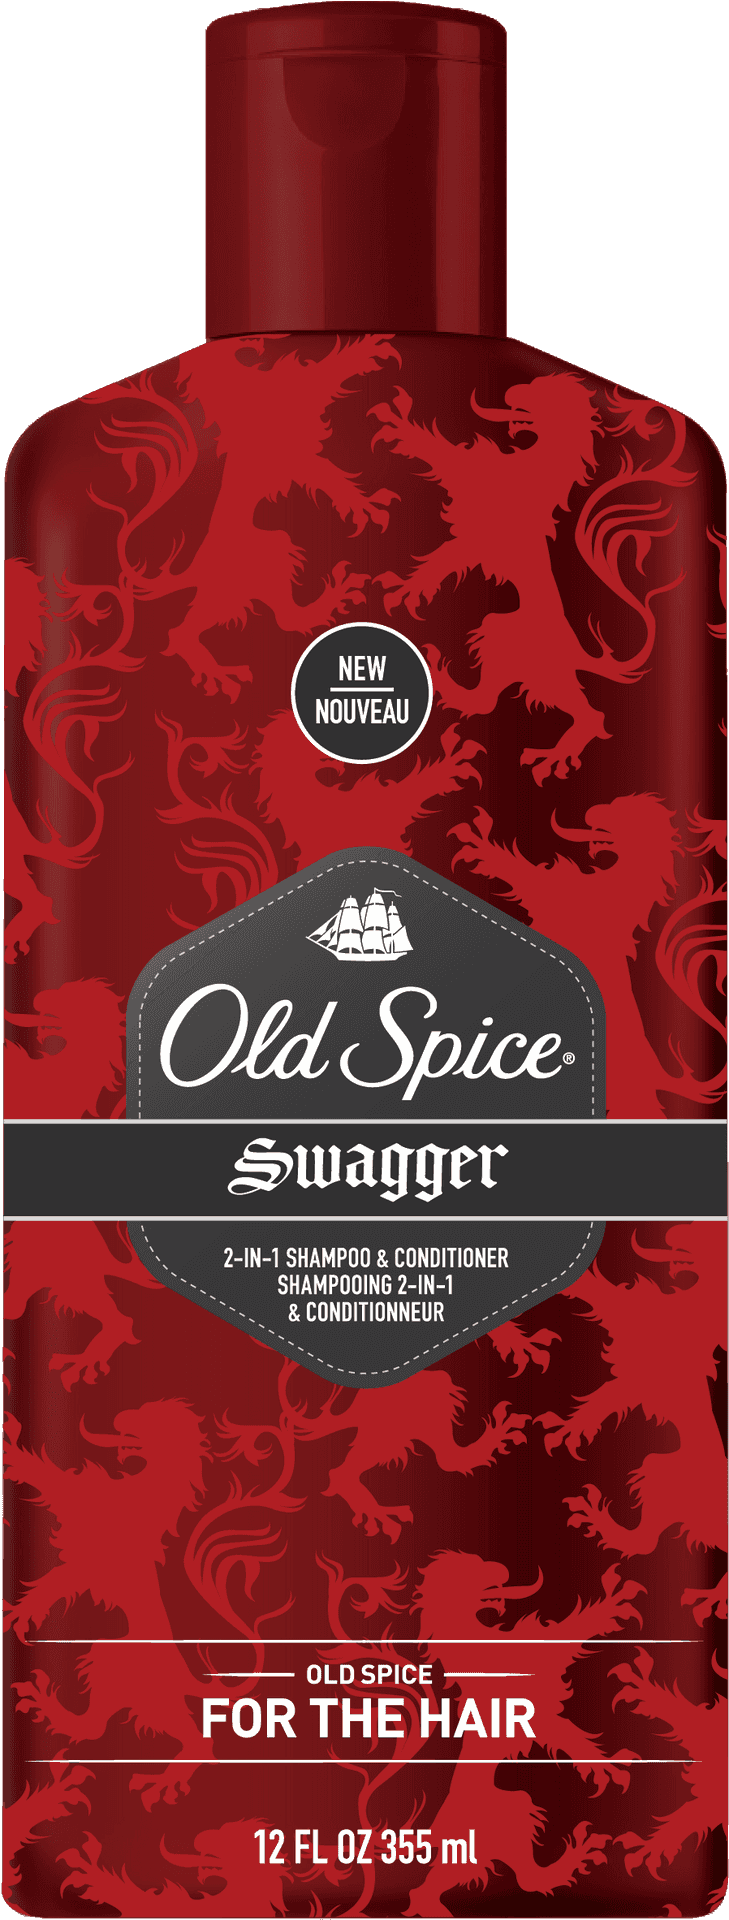 Old Spice Swagger Shampoo Conditioner Bottle PNG